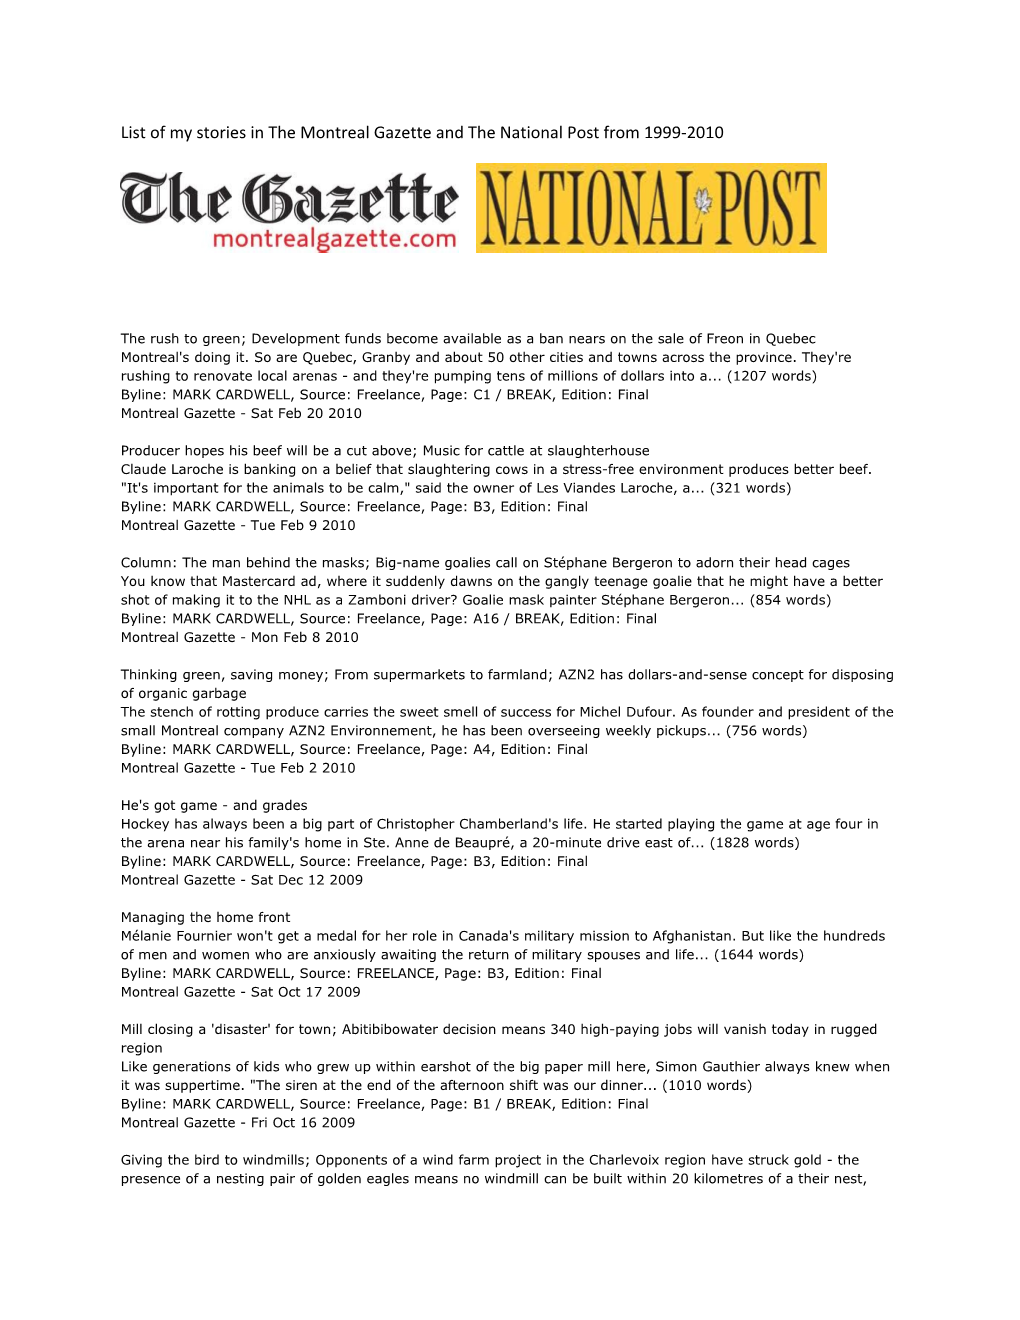 List of My Stories in the Montreal Gazette and the National Post from 1999-2010